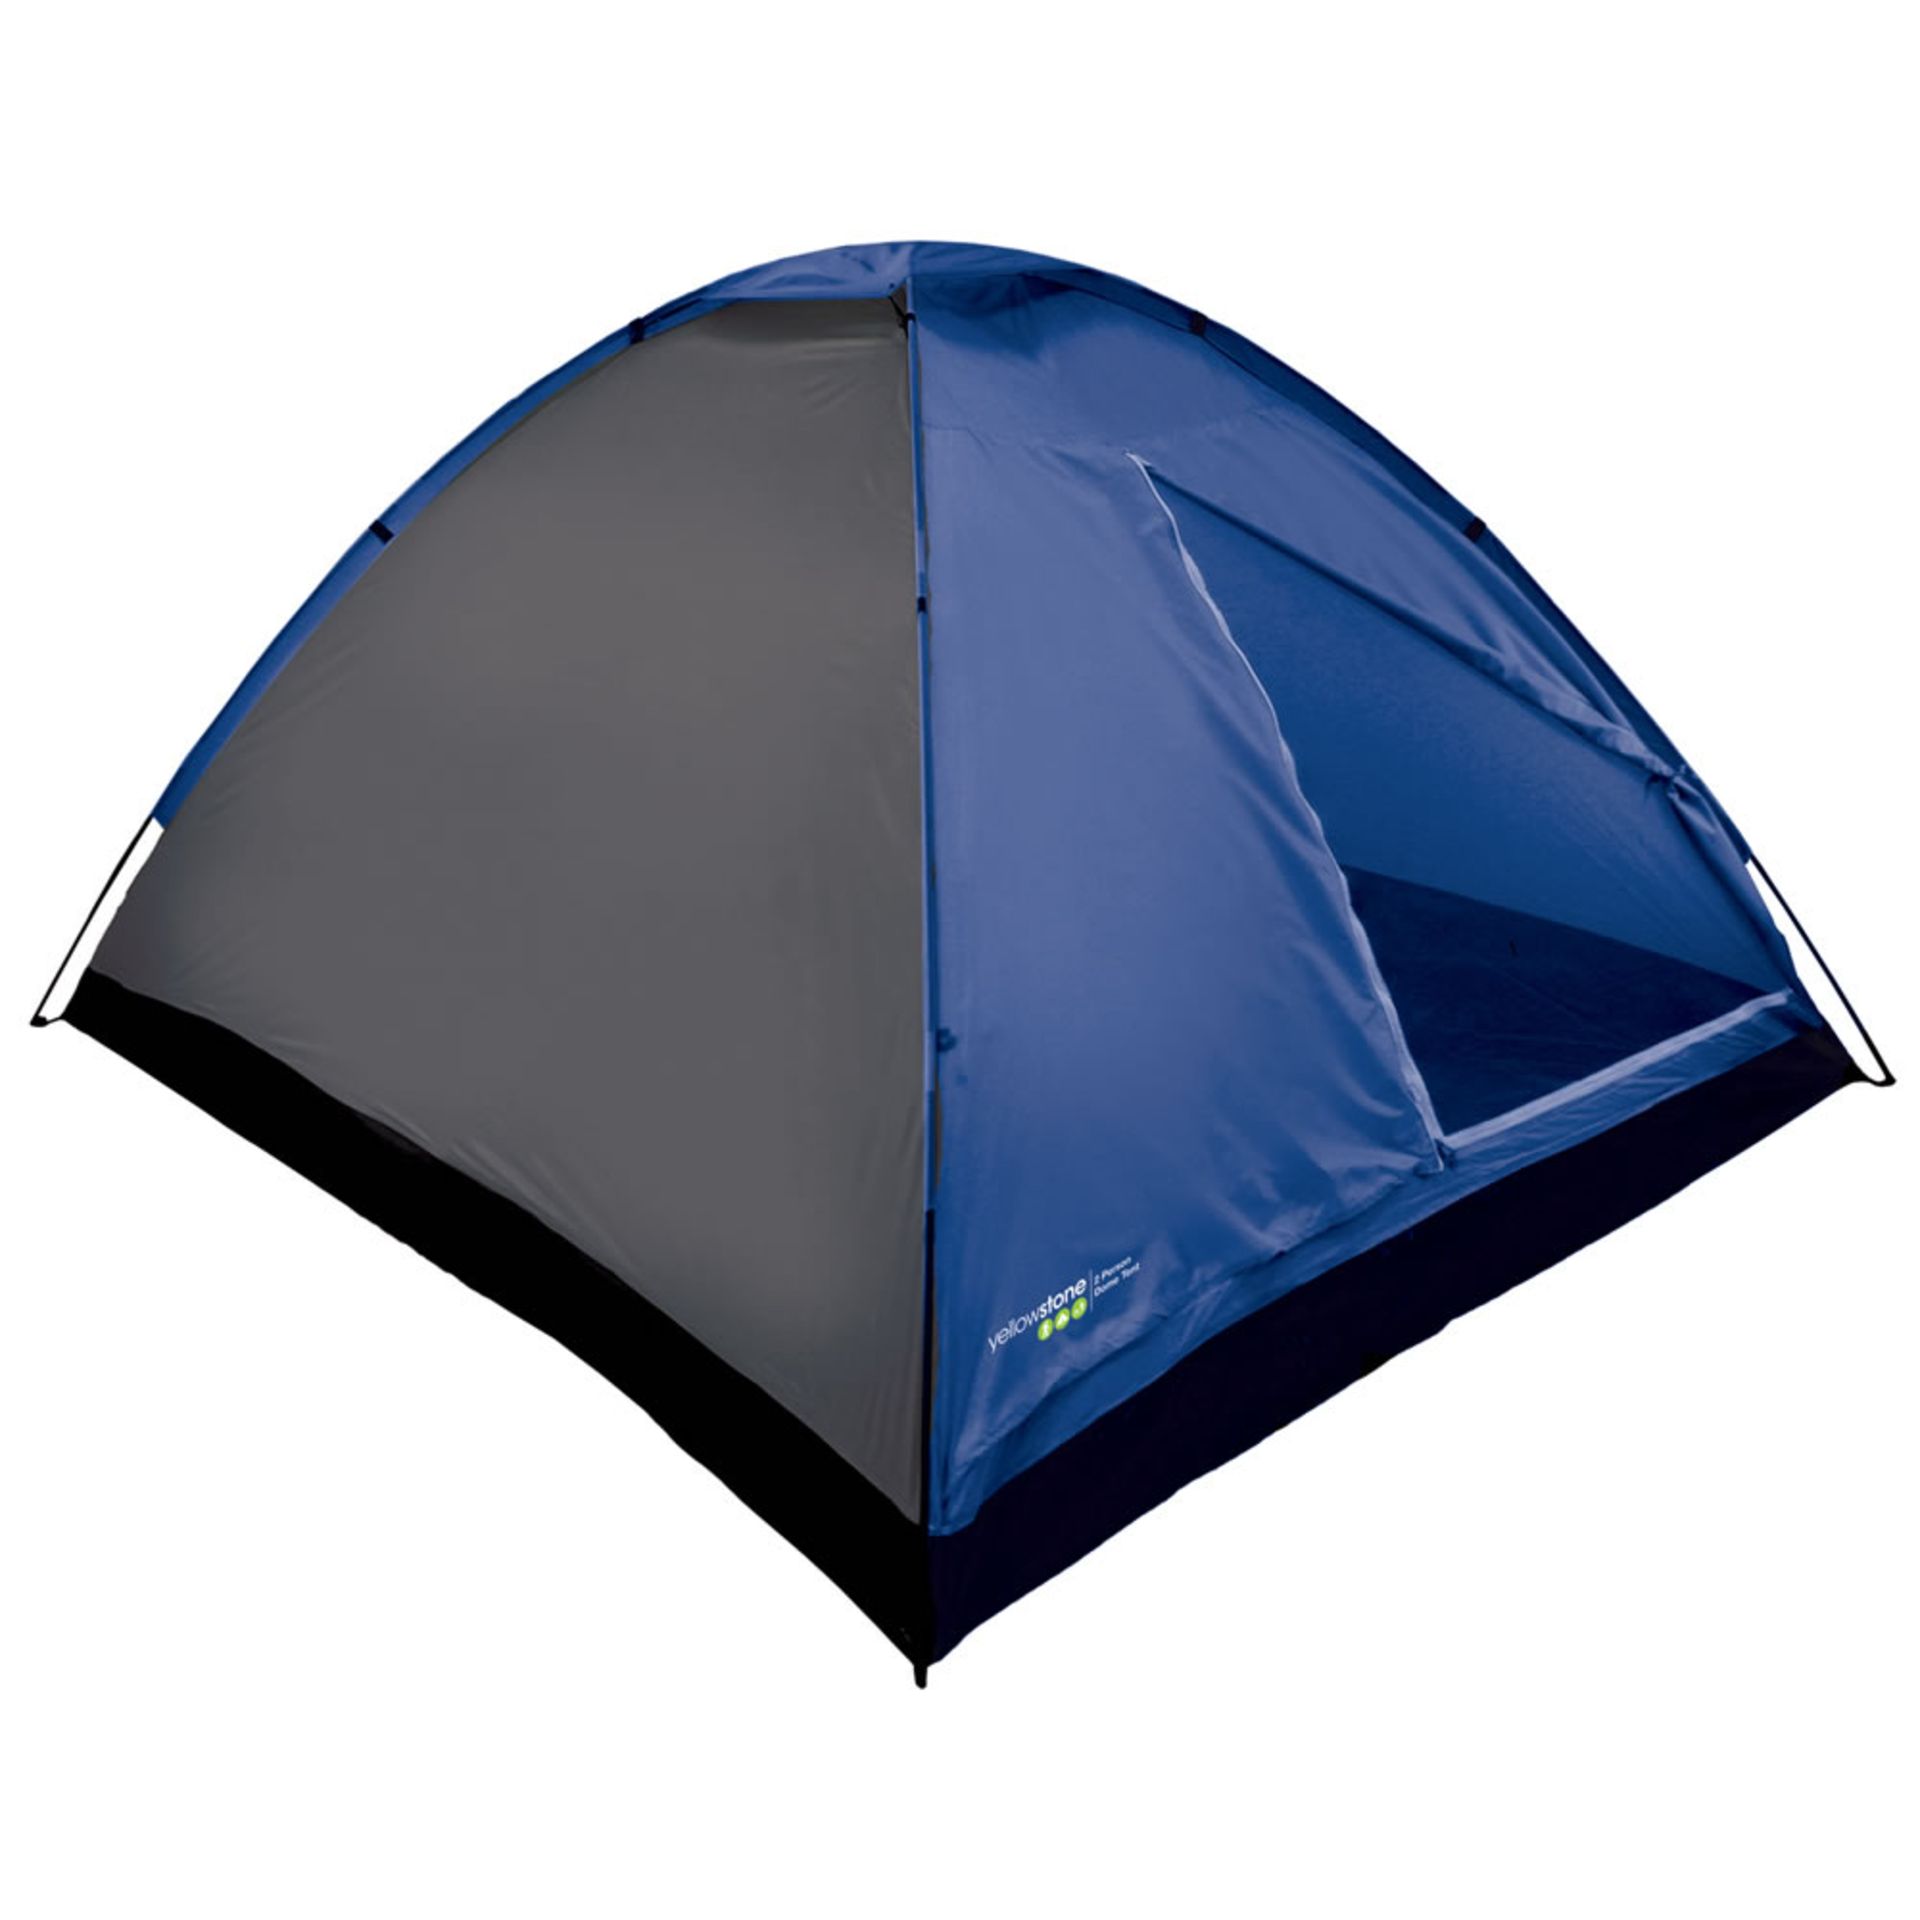 V Two Person Dome Tent X  2  Bid price to be multiplied by Two